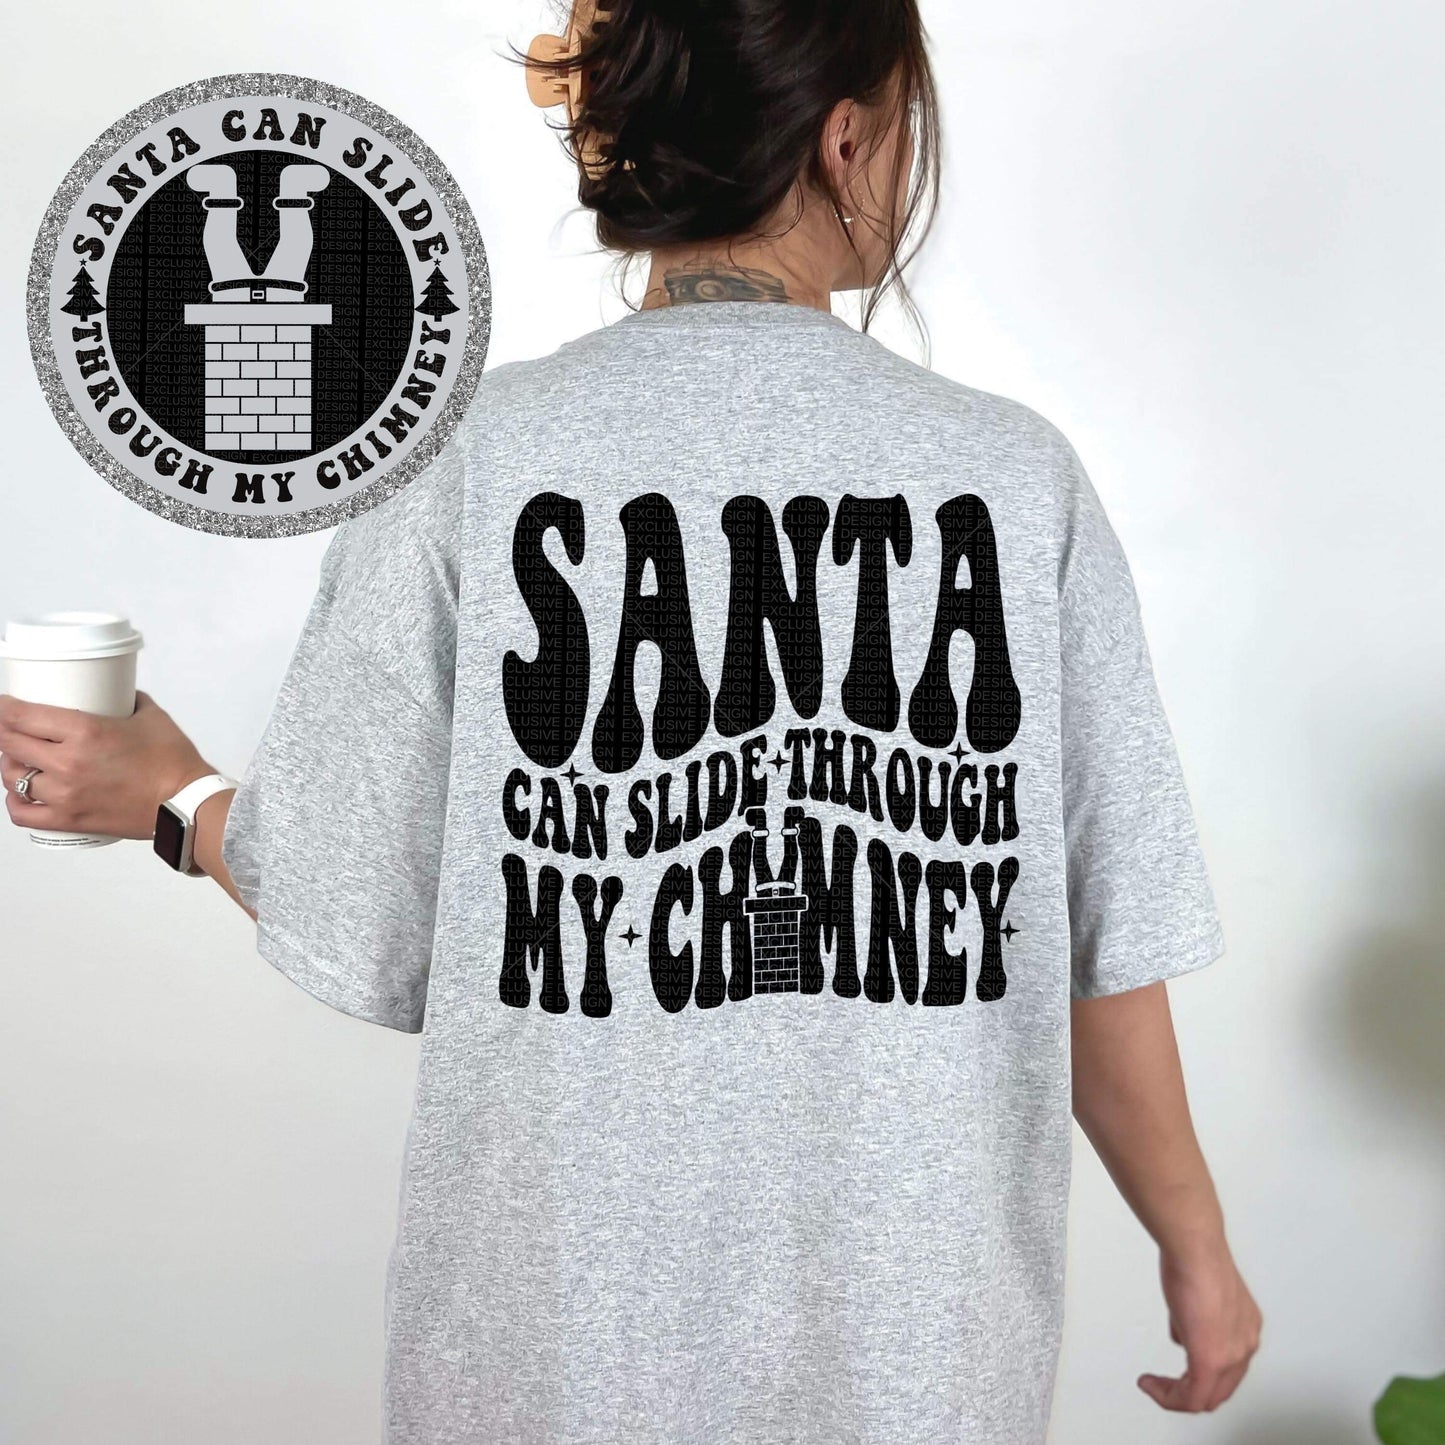 Santa can slide through my chimney- front & back *Ollie & Co. Exclusive*